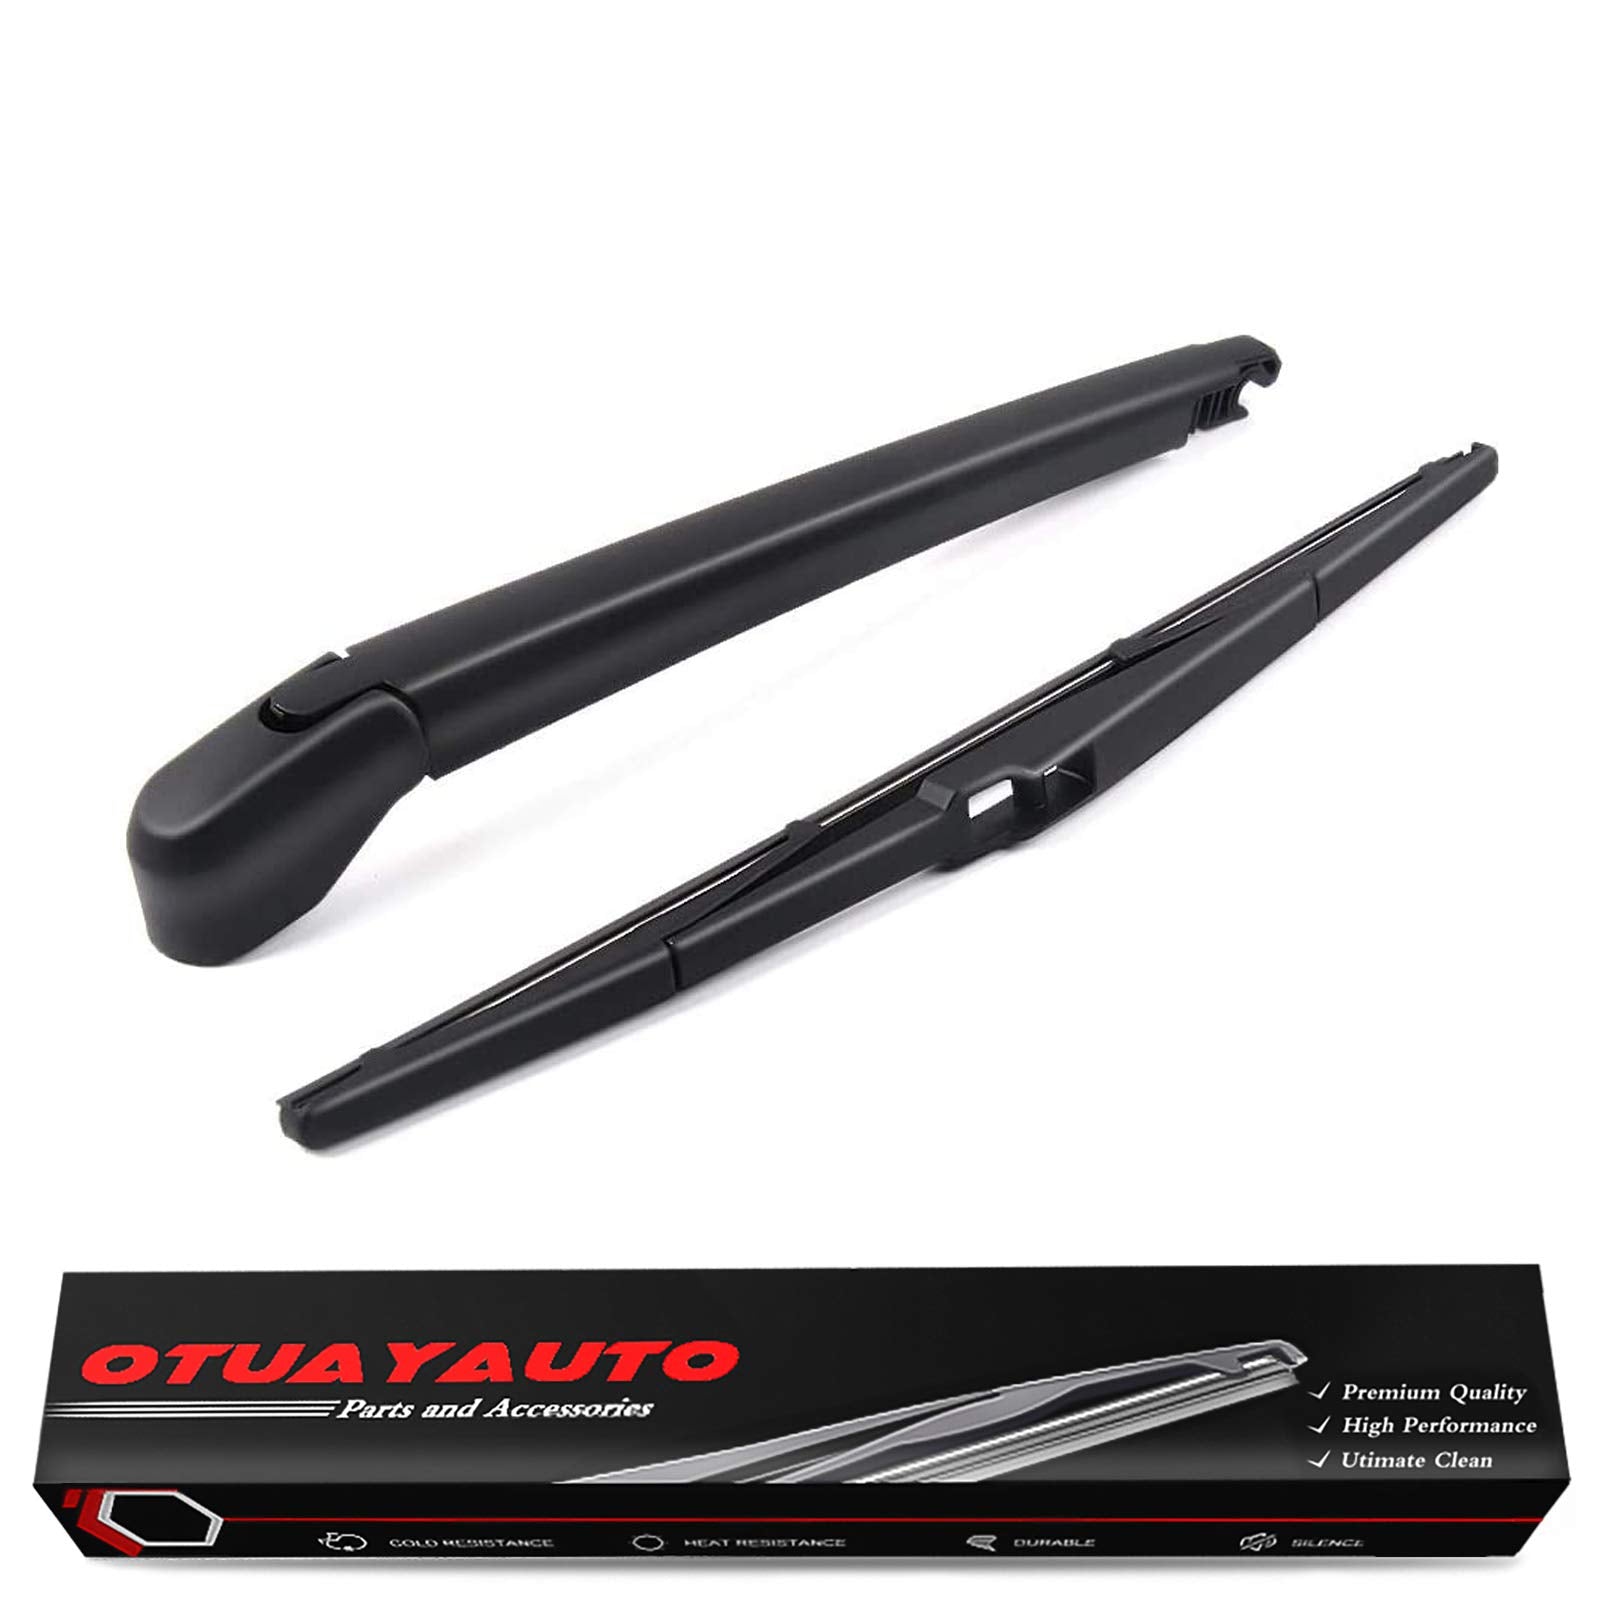 OTUAYAUTO Rear Wiper Arm Blade Set - Replacement for 2004-2010 Toyota Sienna, 2007-2015 Mazda CX7 CX9 - Replacement OEM 85241AE010